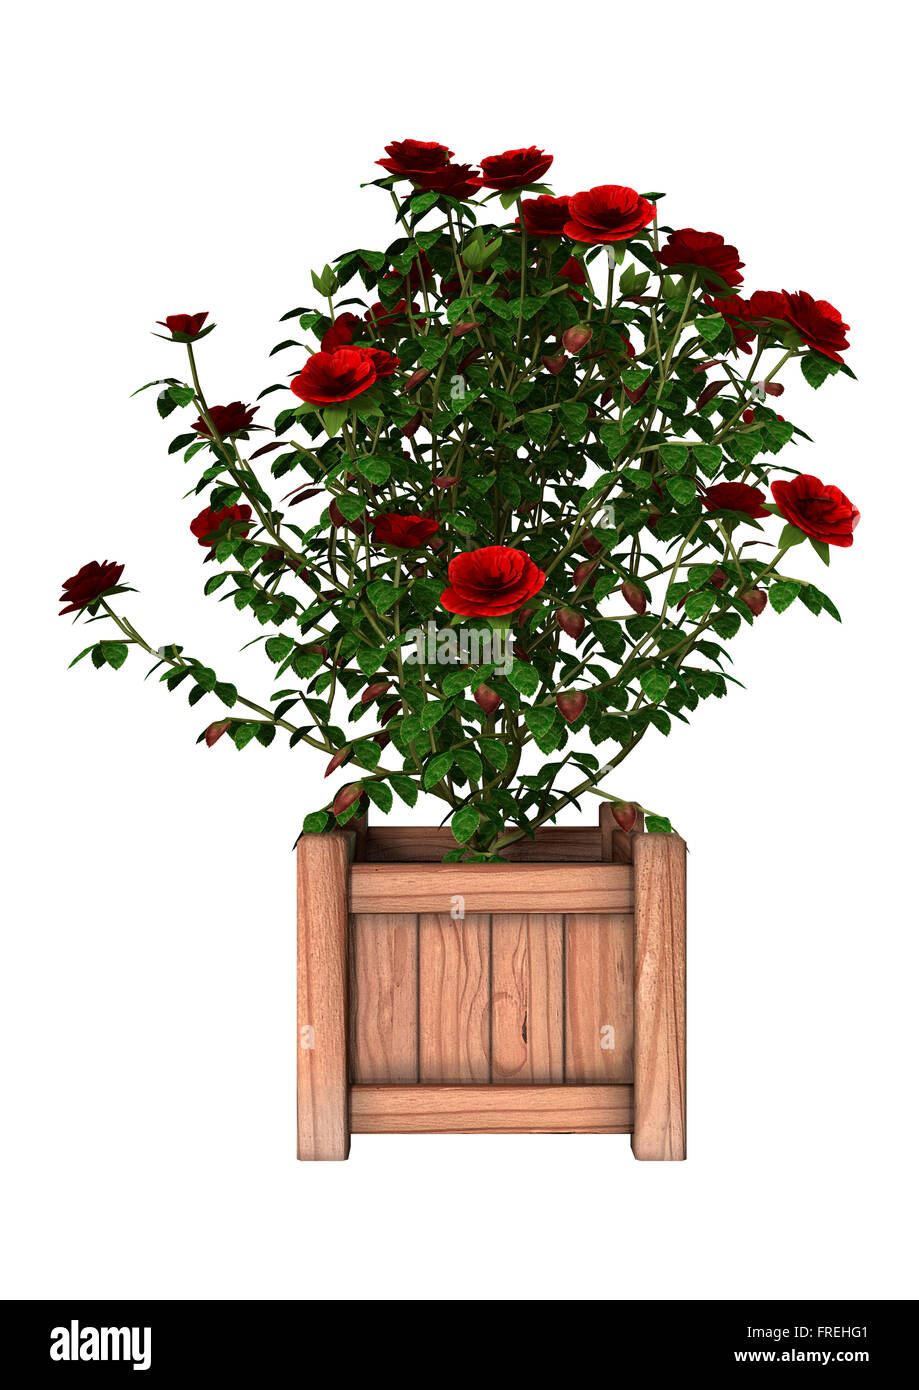 Digital render of a red rose bush isolated on white background Stock Photo